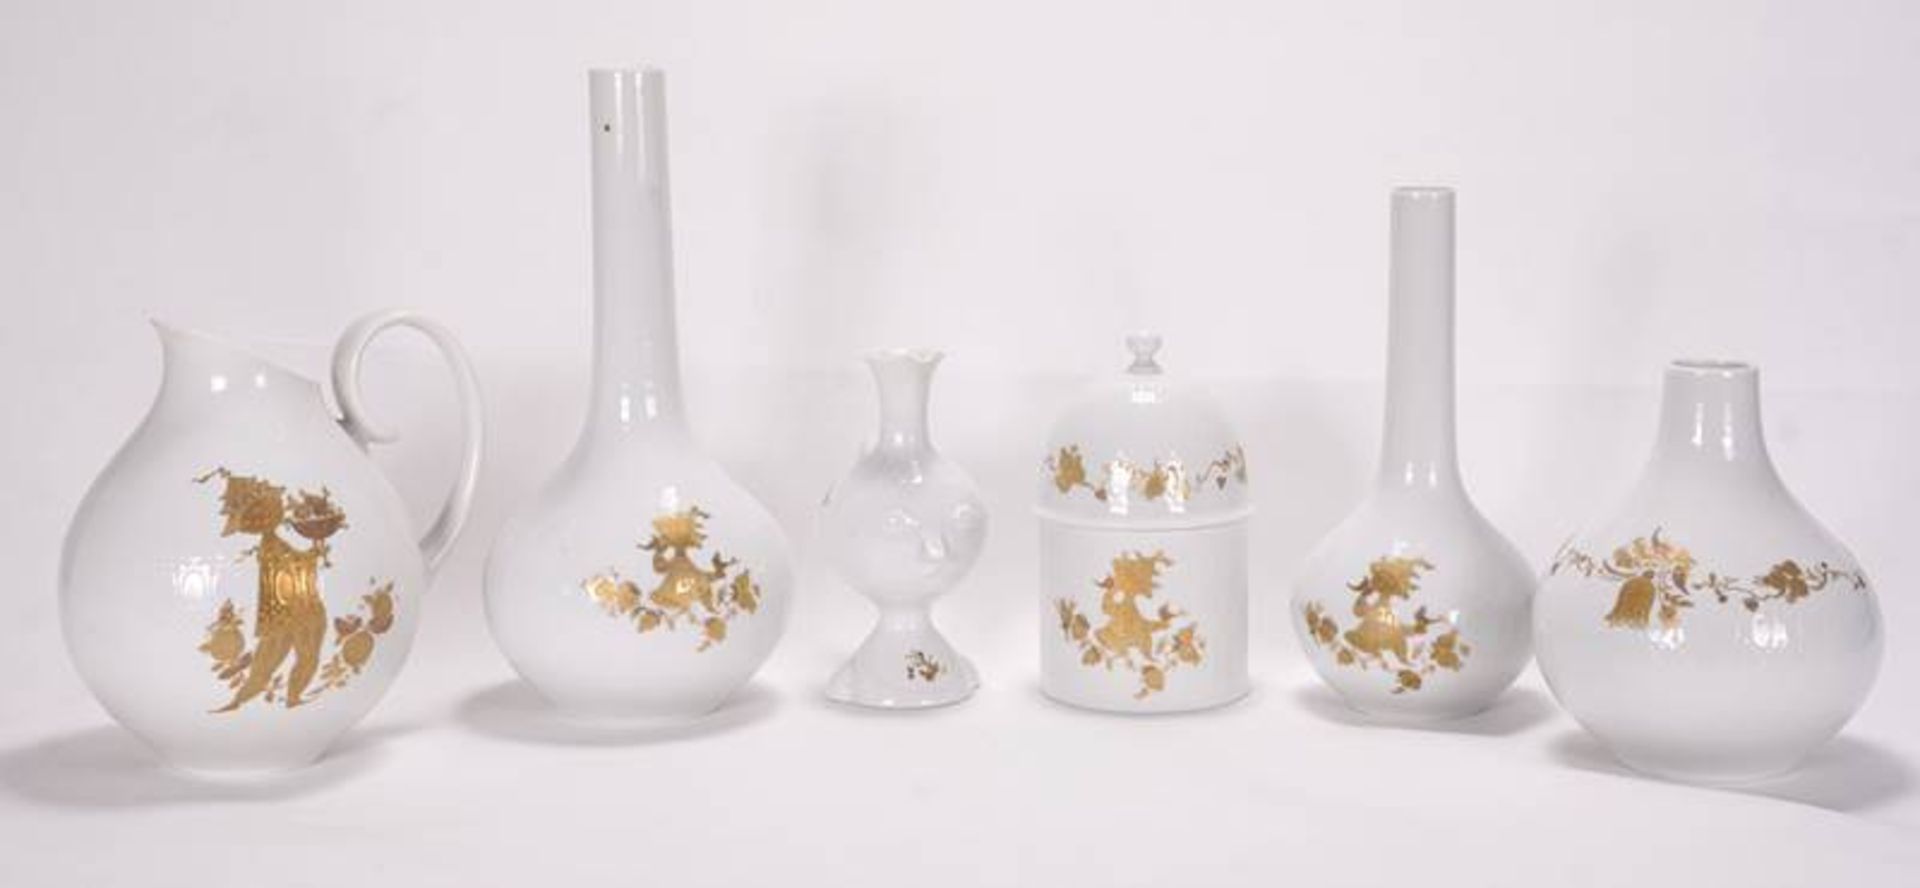 Rosenthal collection. - Image 2 of 5